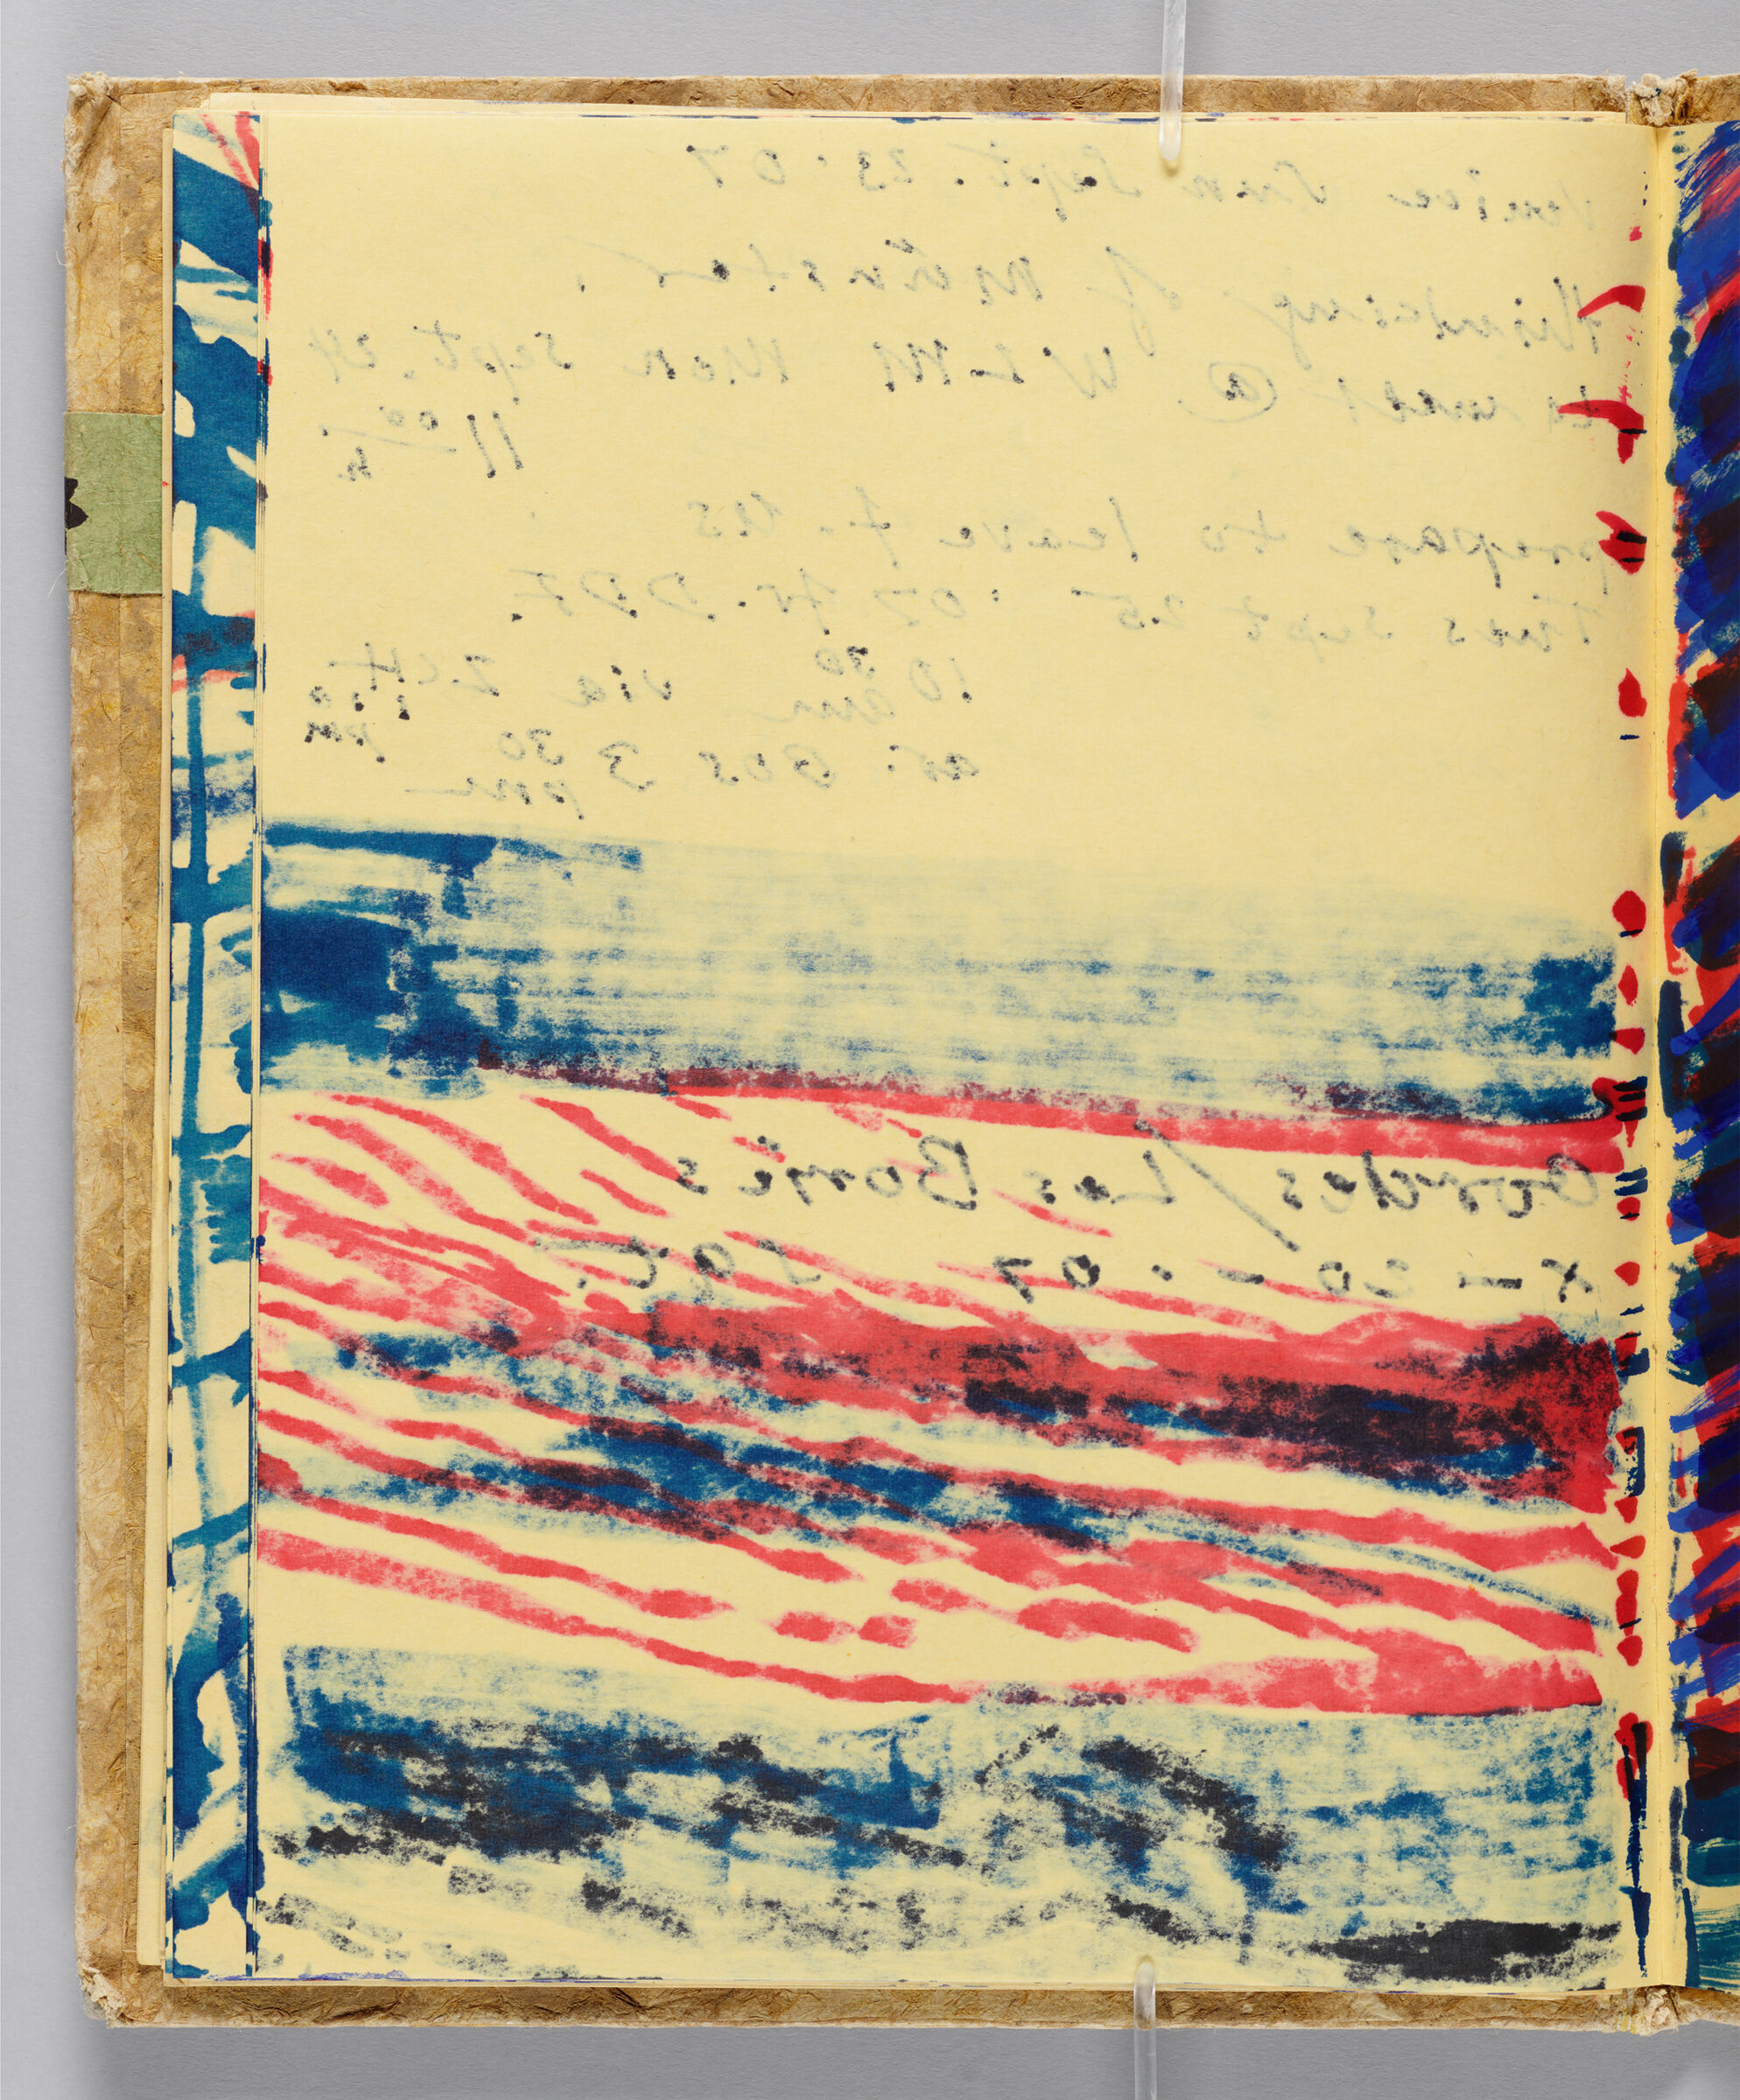 Untitled (Bleed-Through Of Previous Page, Left Page); Untitled (Land- And Skyscape, Right Page)